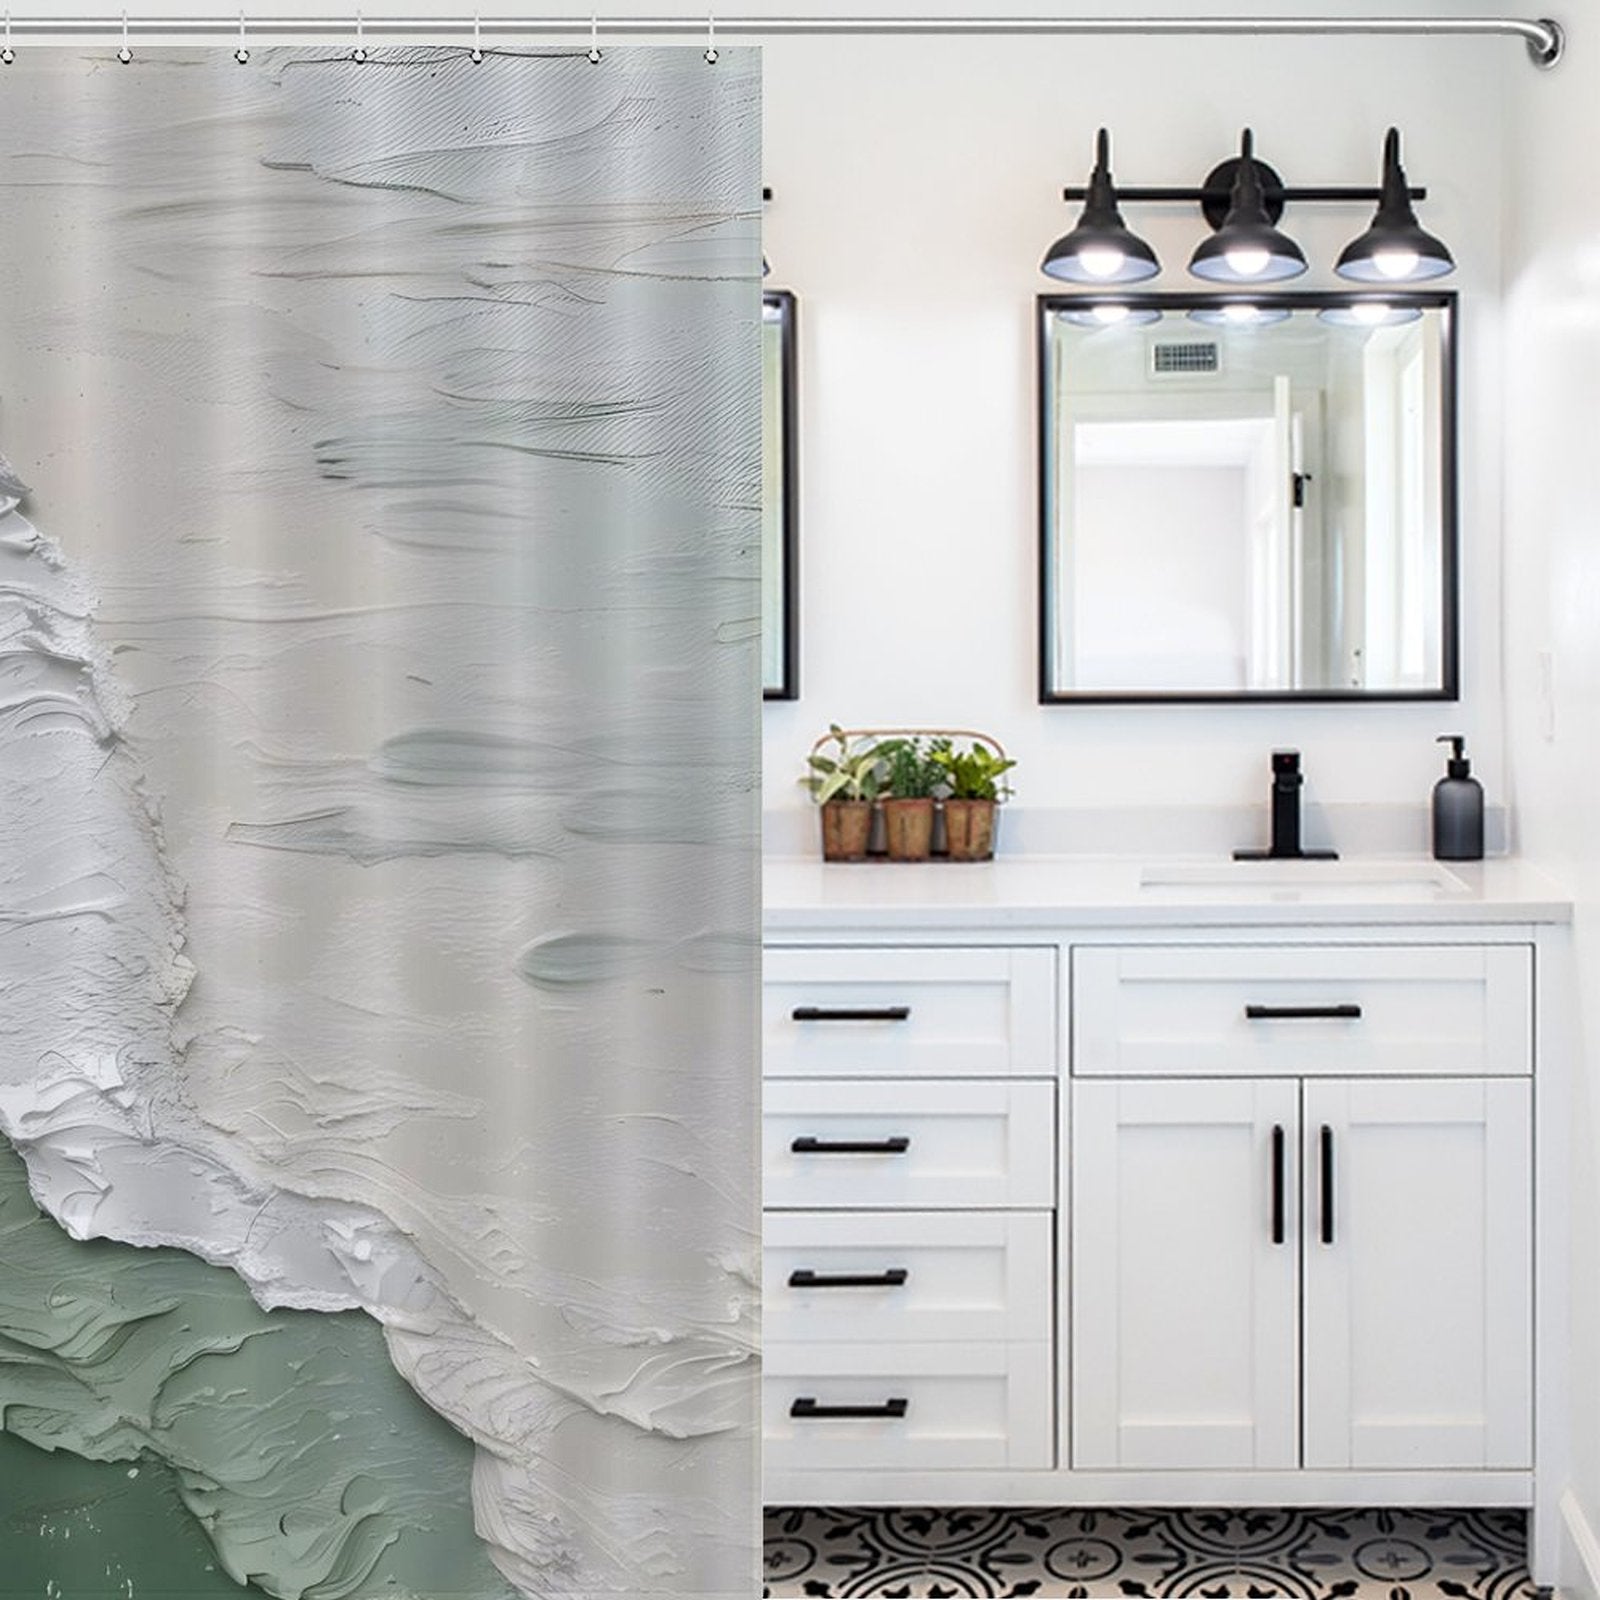 Modern bathroom with a white vanity, black hardware, twin mirrors, and three black-light fixtures. The floor boasts a patterned design, while the left side features a Coastal Oil Painting Ocean Sea Green Waves Minimalist Shower Curtain Abstract Beach Shower Curtain-Cottoncat by Cotton Cat.